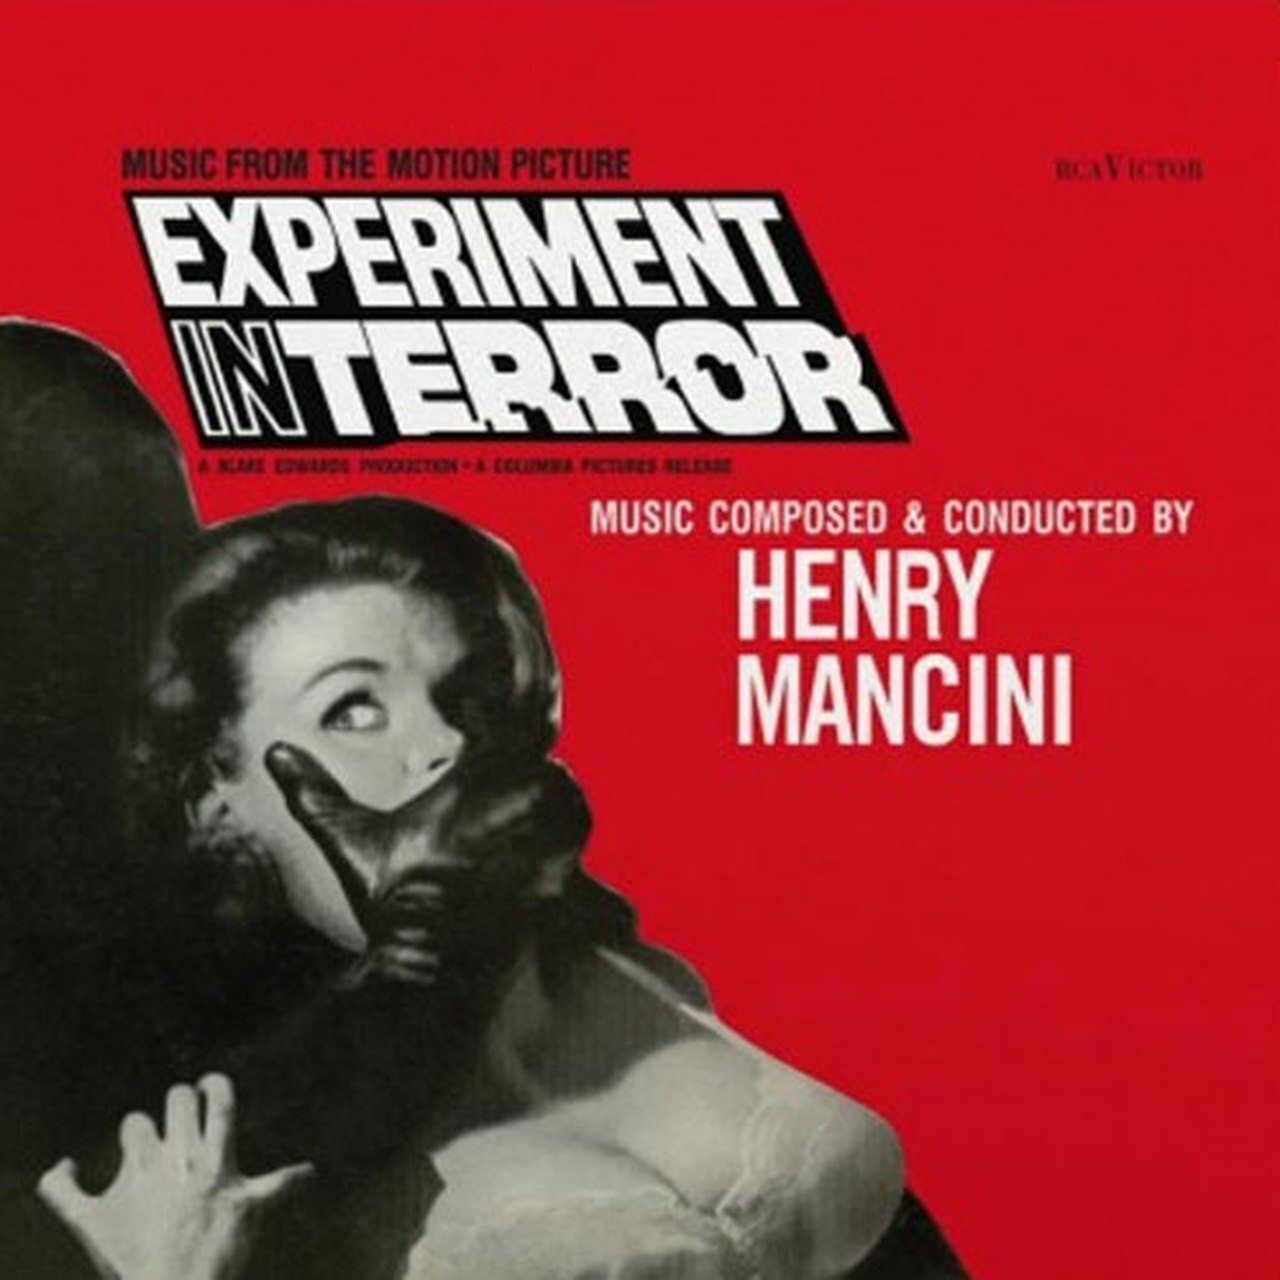 Mancini, Henry - Experiment in Terror (Limited Edition, 180g, Blood Red Vinyl) - 8718469539345 - LP's - Yellow Racket Records